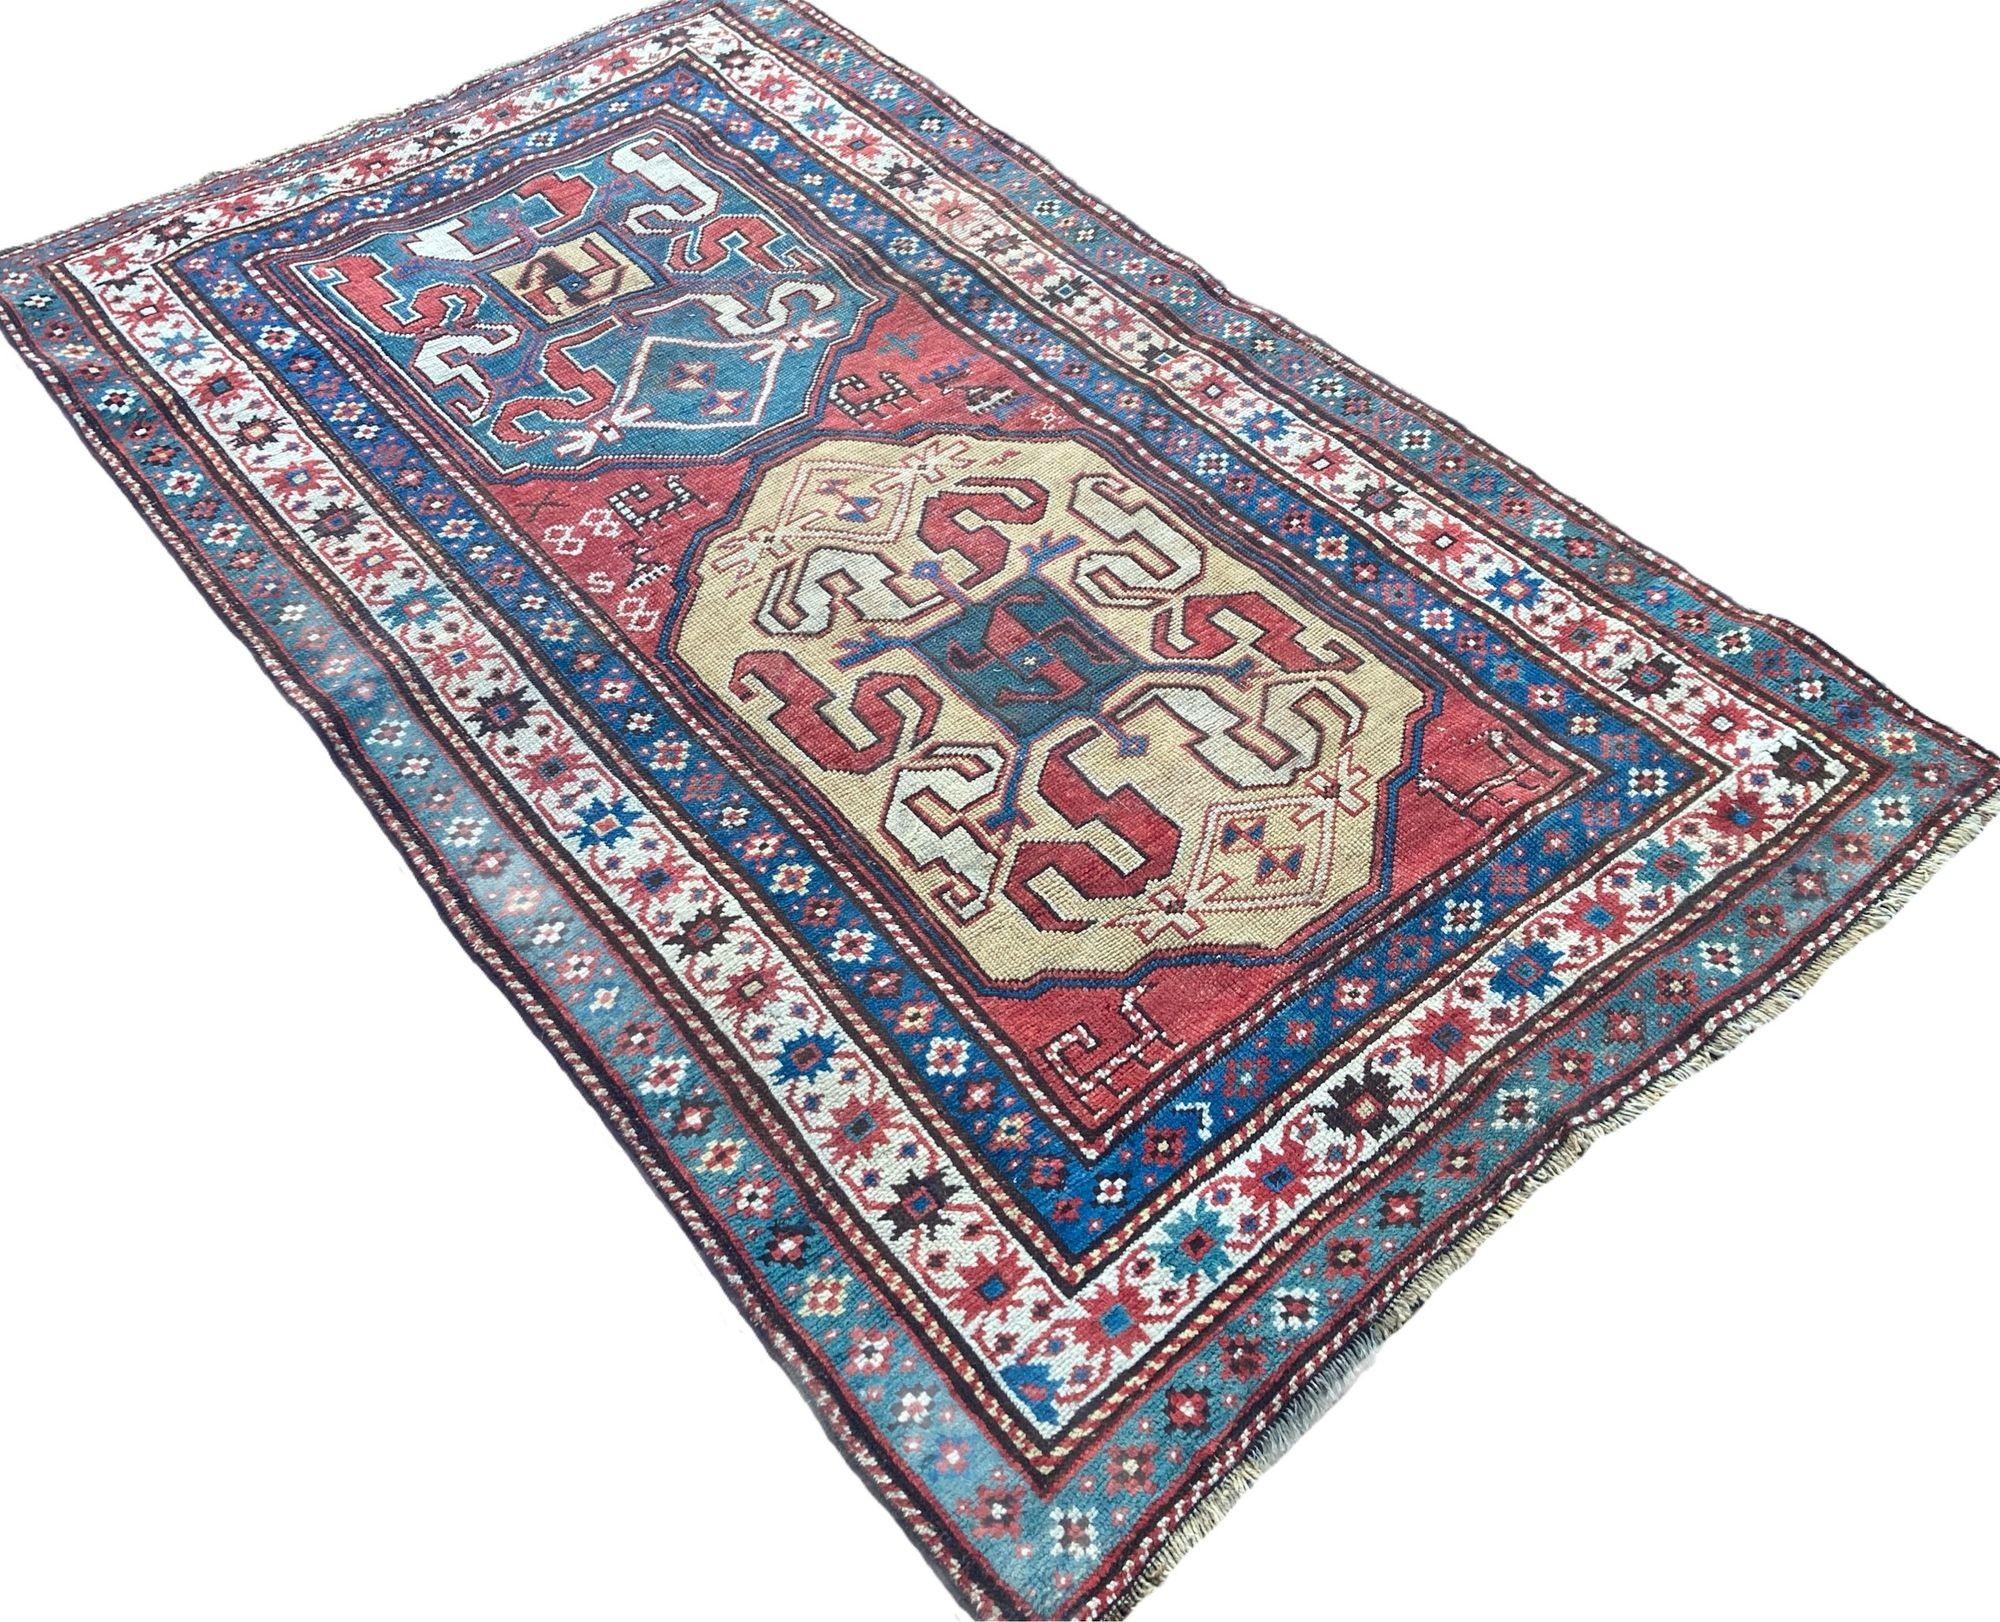 Antique Caucasian Chondoresk Rug 1.94m x 1.17m In Good Condition For Sale In St. Albans, GB